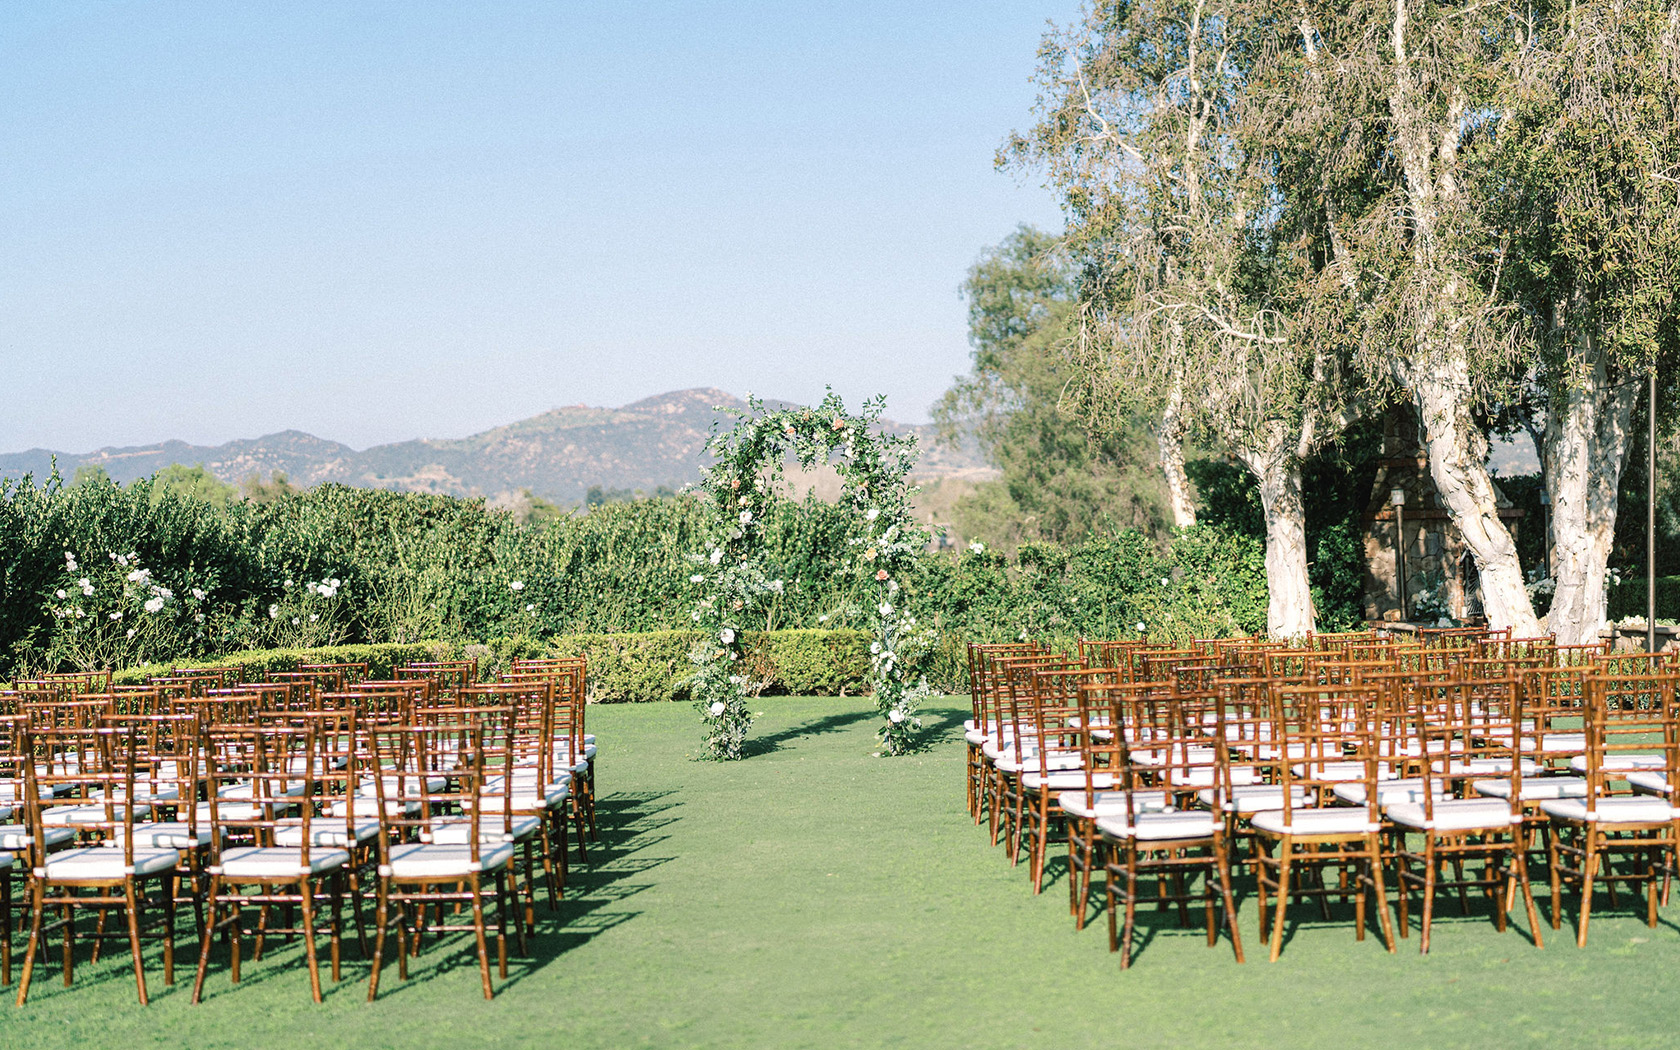 an area set up for an outdoor wedding with wooden chairs and a floral arch